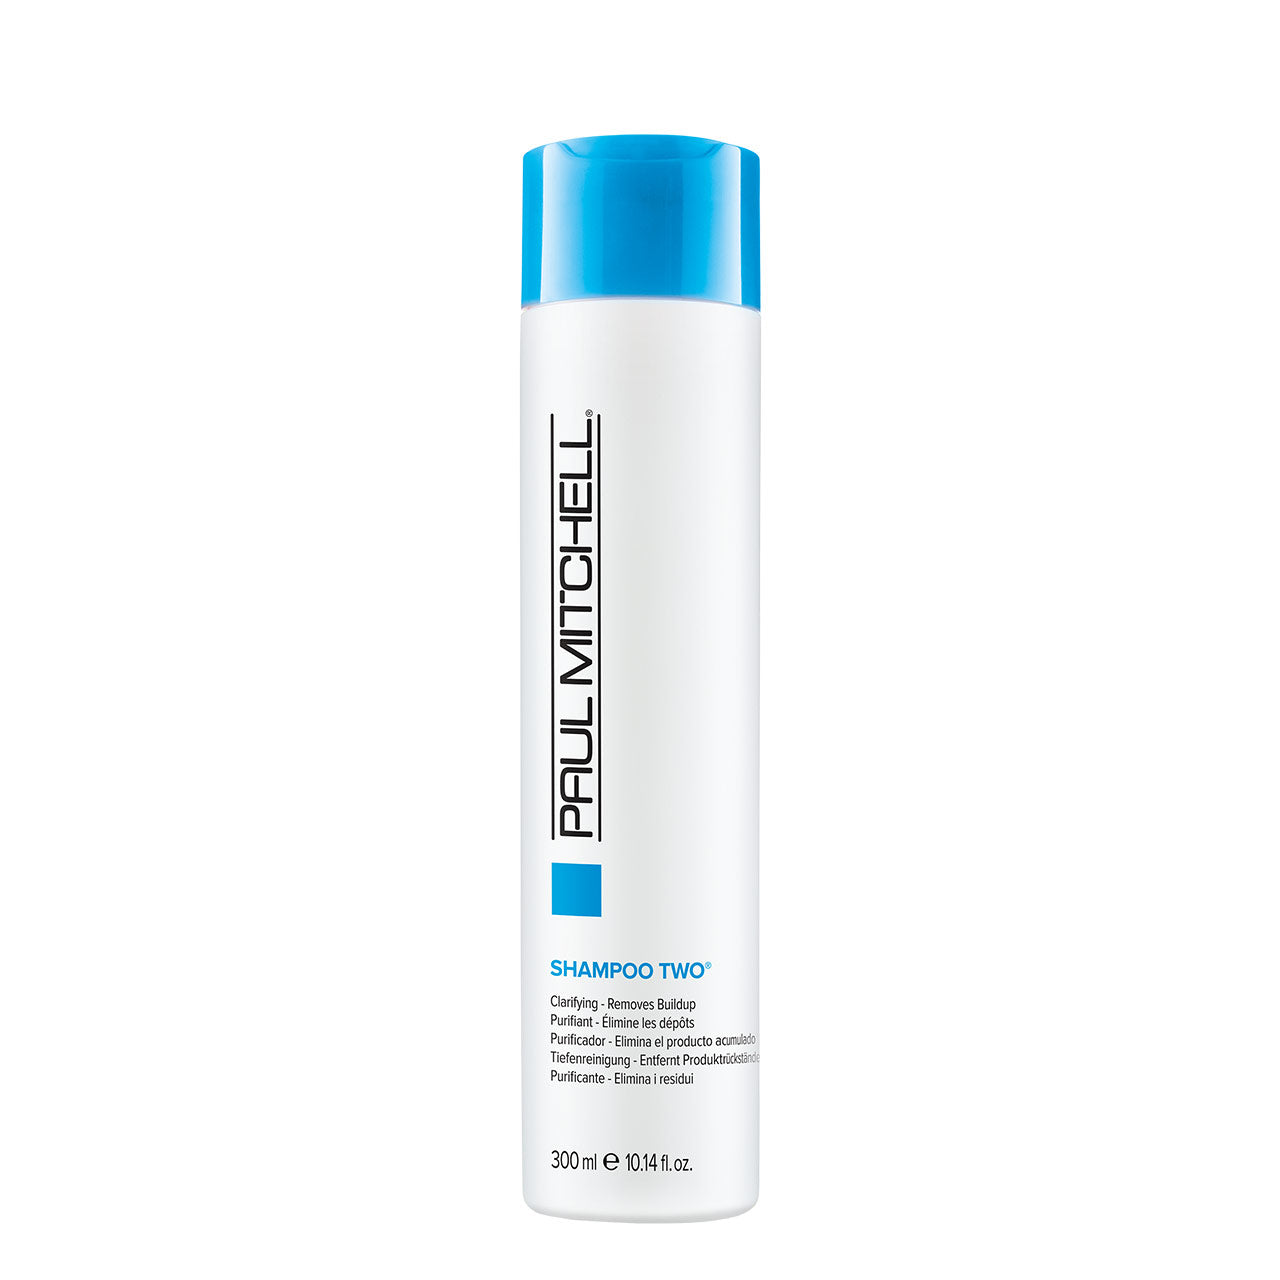 Clarifying Shampoo Two - 300ML - by Paul Mitchell |ProCare Outlet|